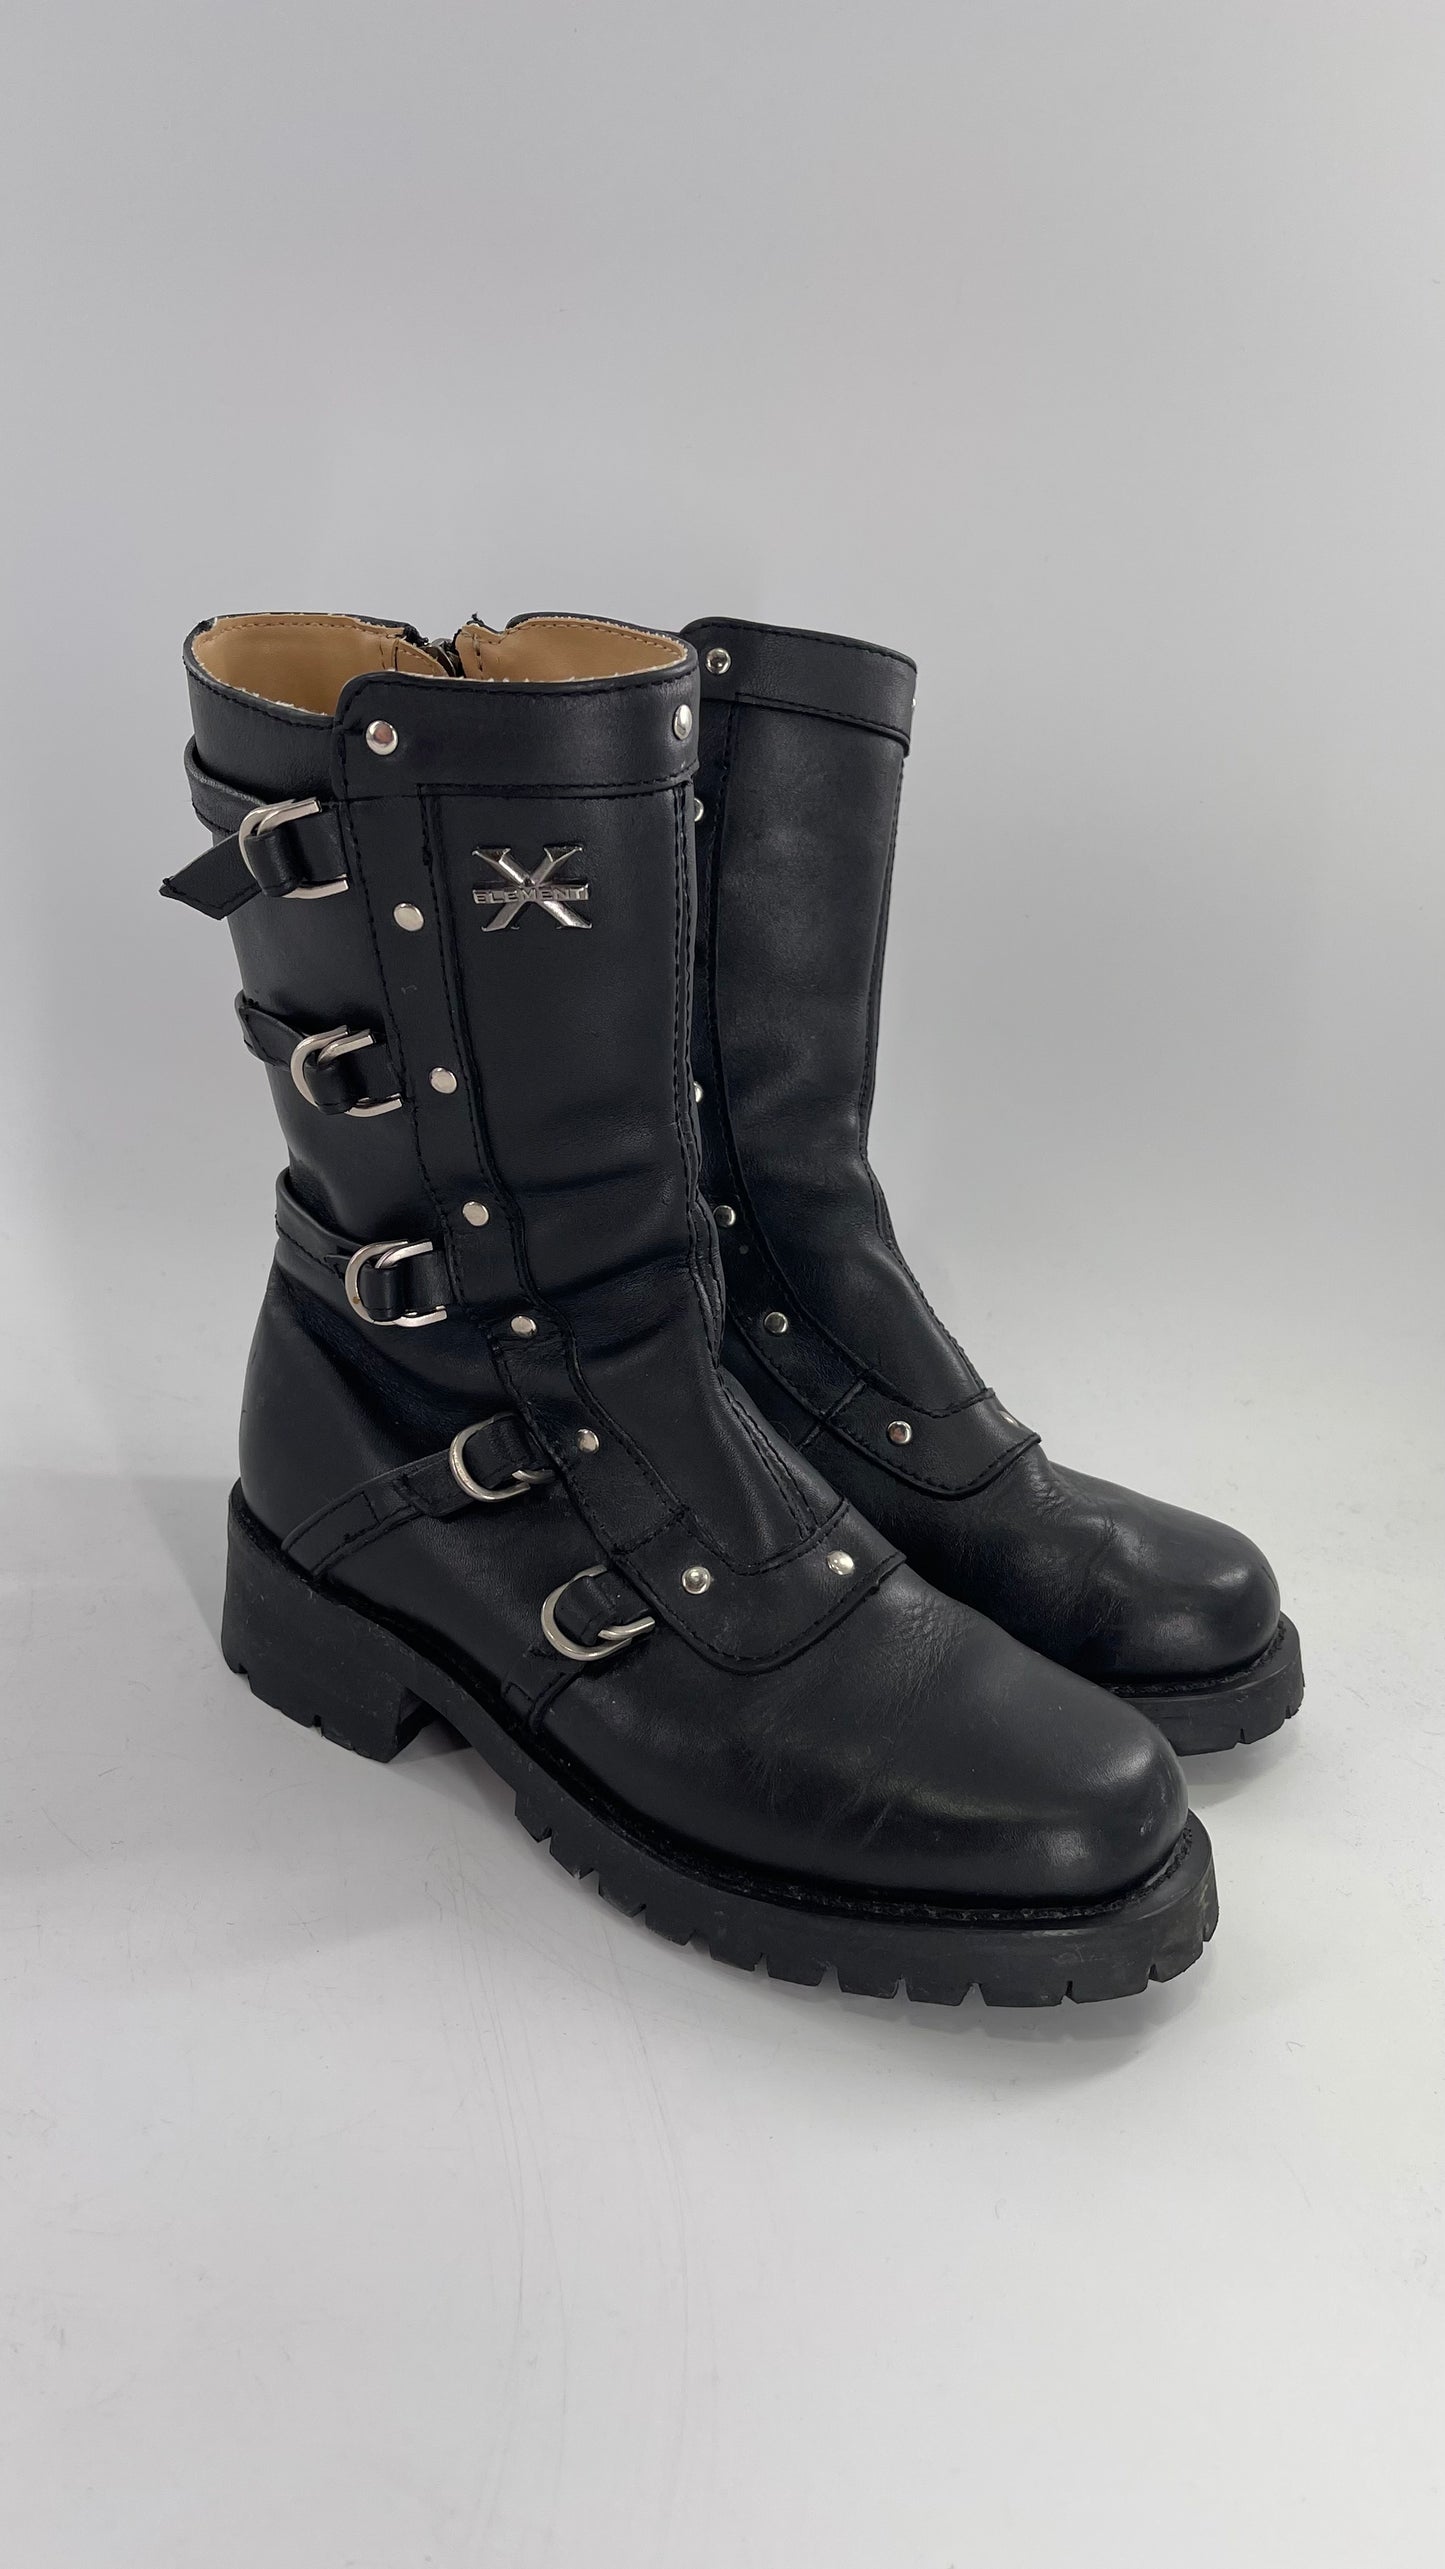 Vintage 1990s XELEMENT Buckle Side Genuine Leather Steam Punk Boots (Women’s 8.5)